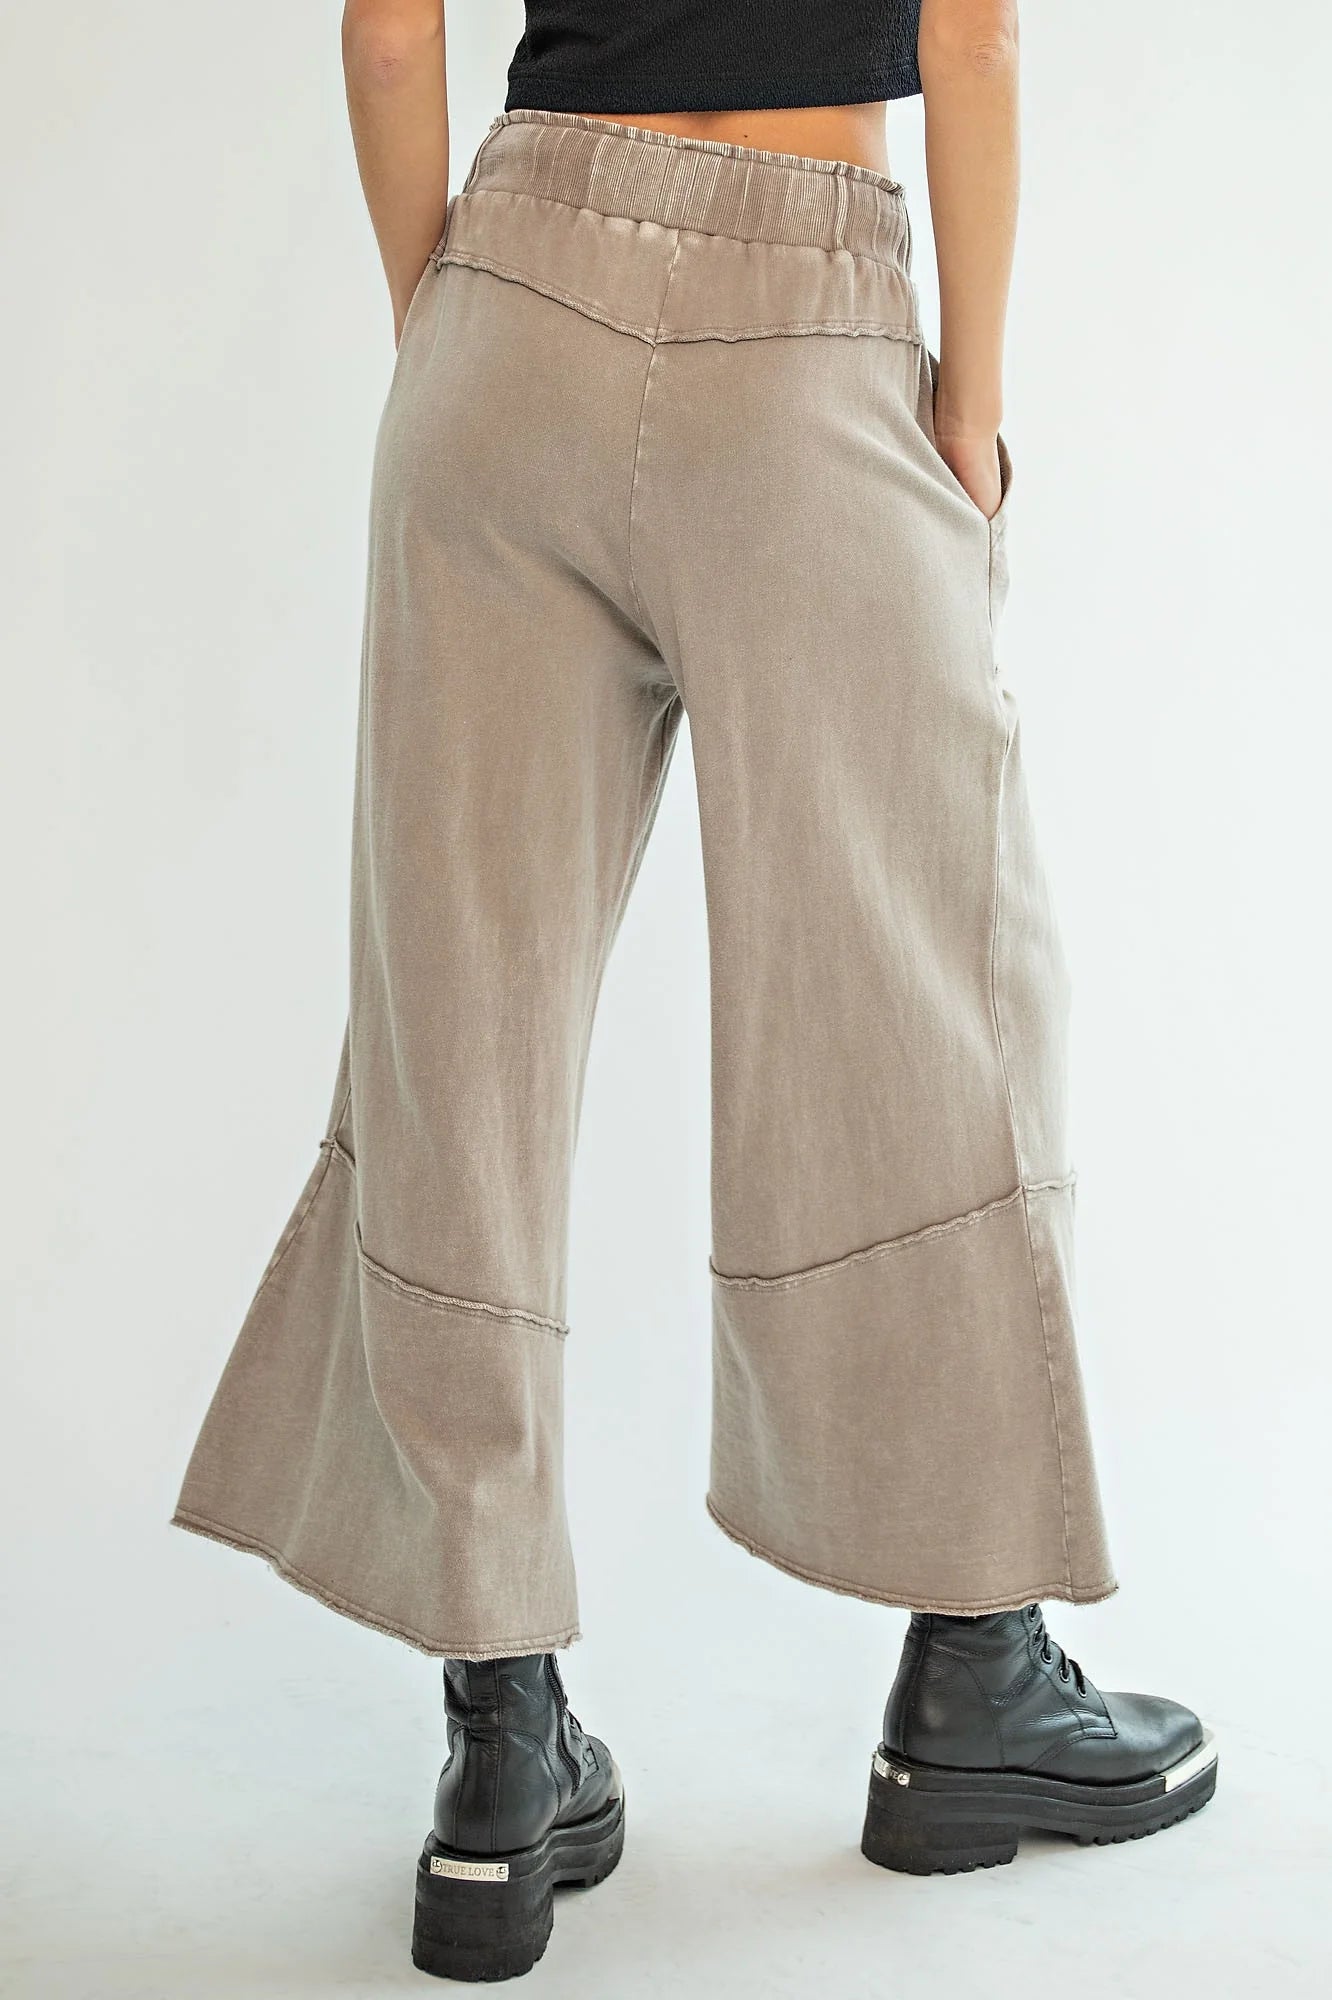 Chill Vibes Mineral Washed Terry Knit Wide Leg Pants in Mushroom